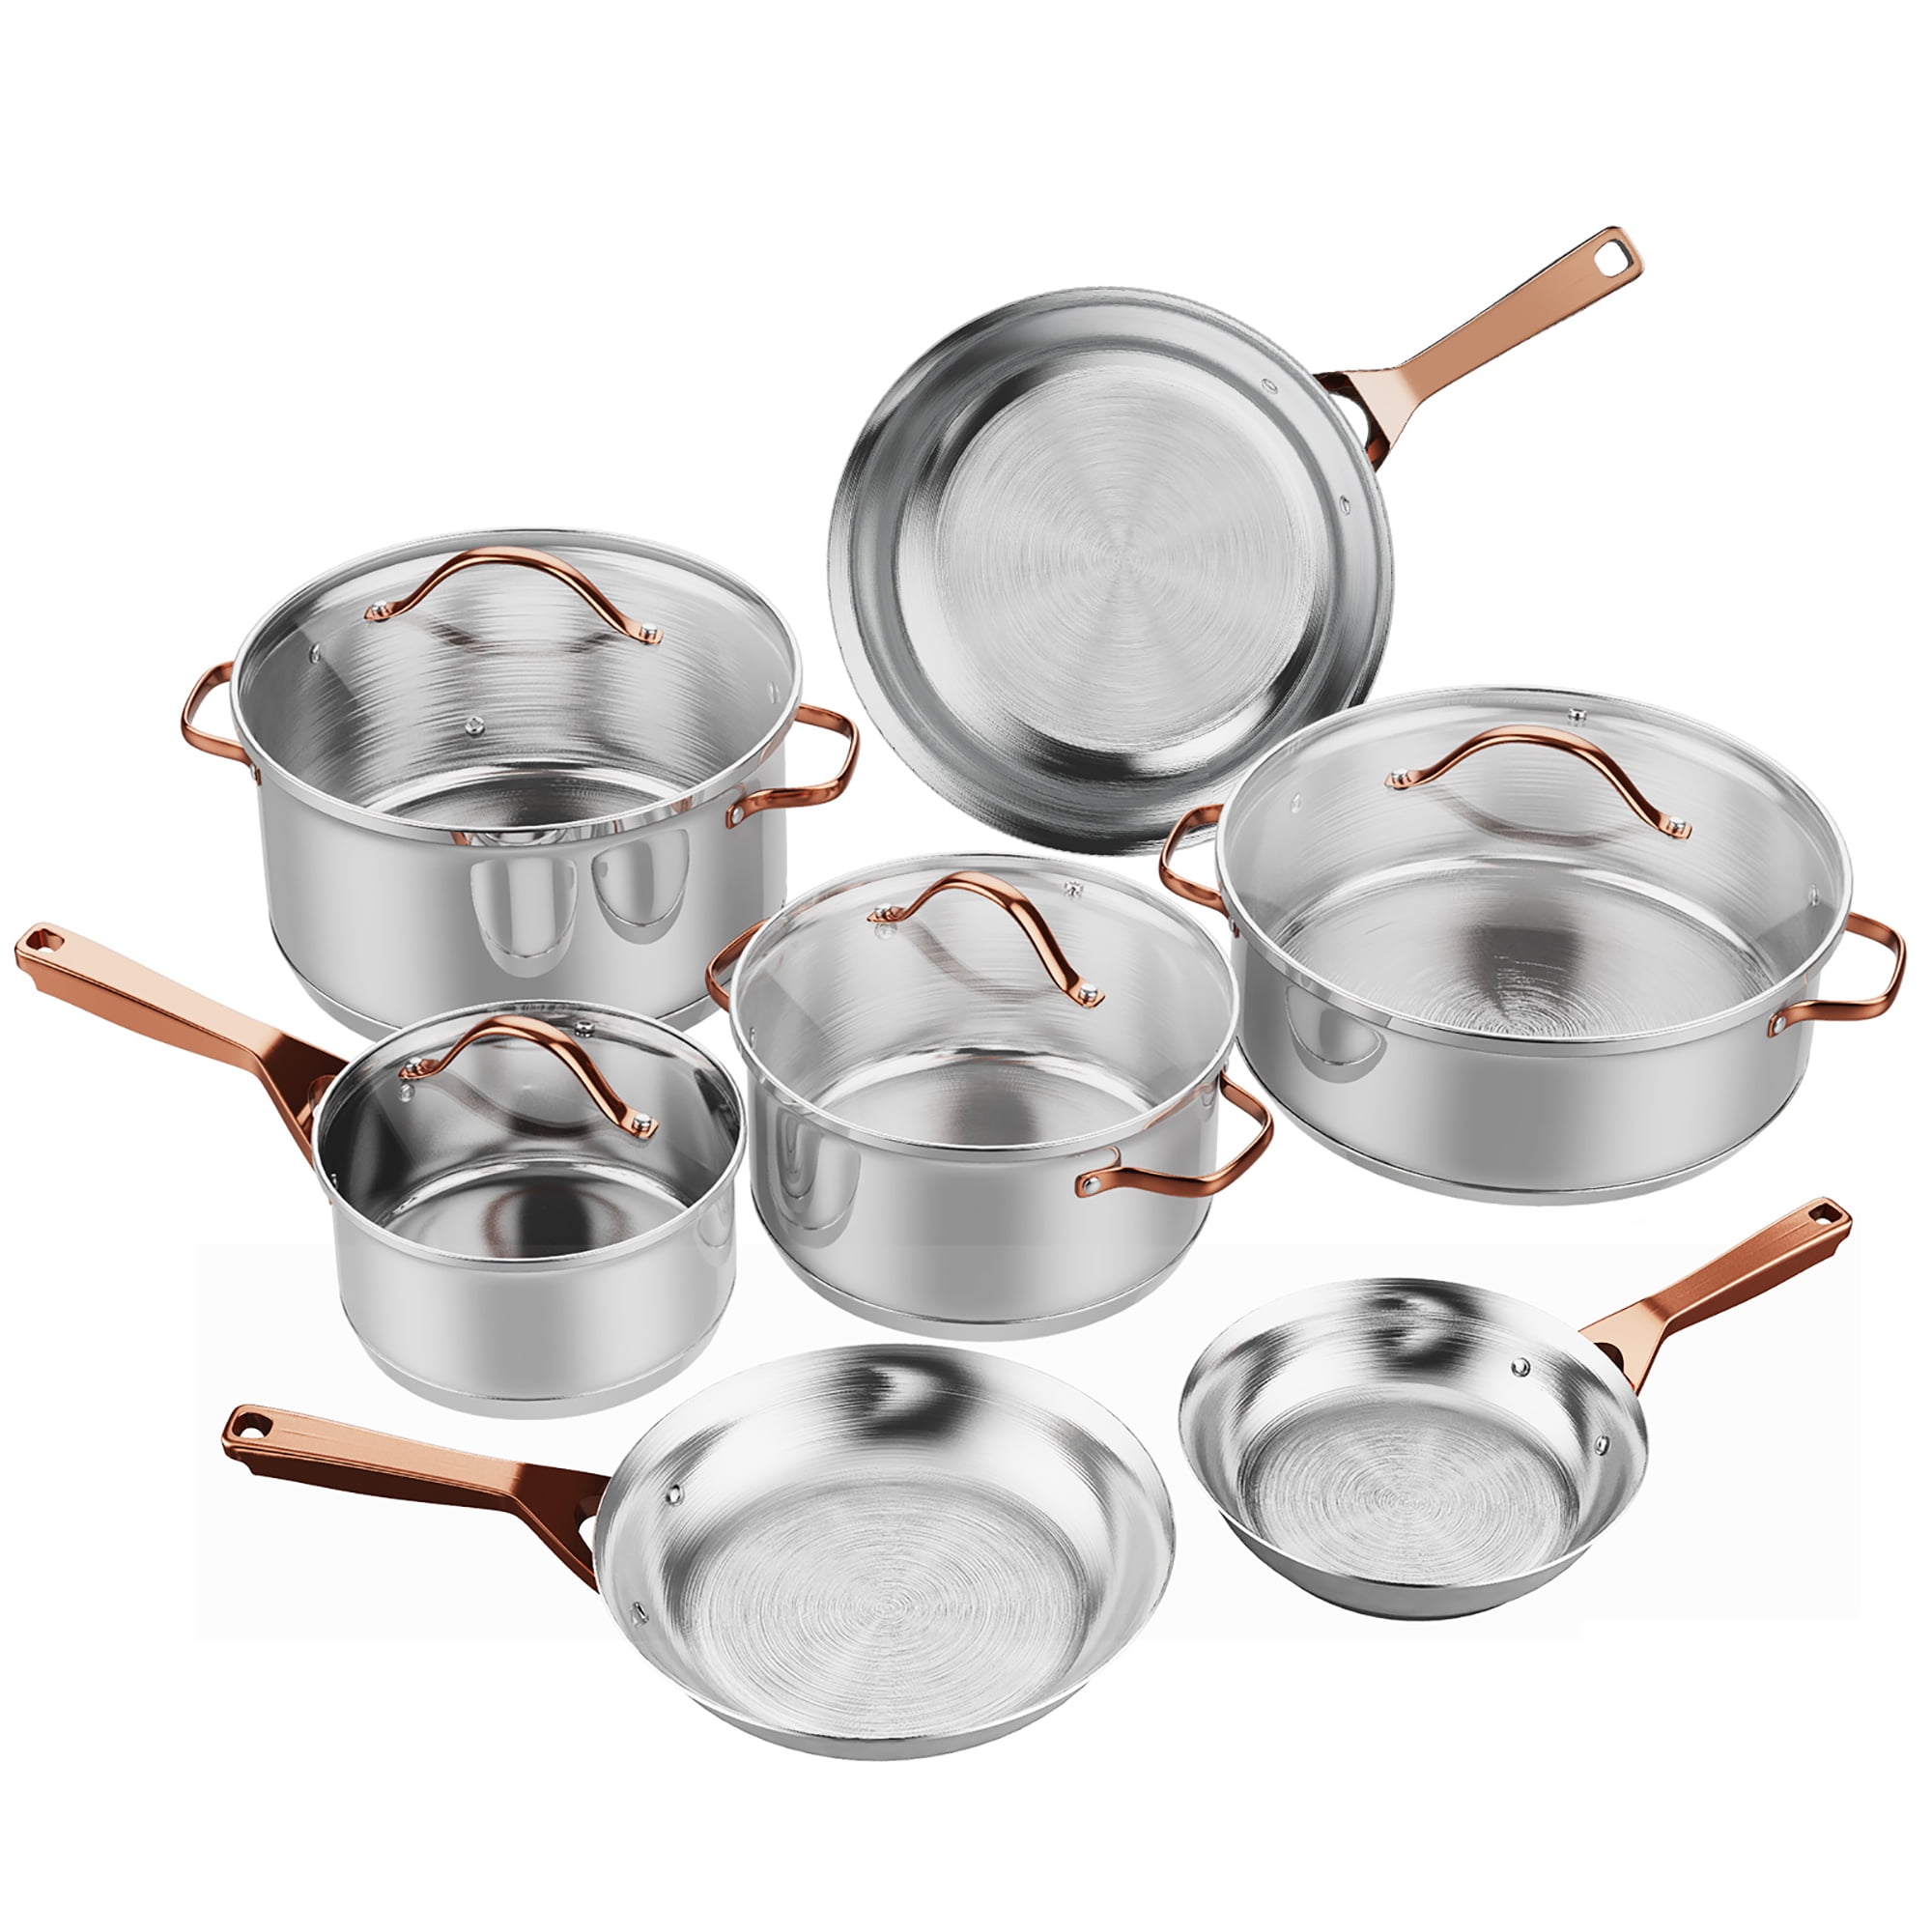 Costway 11pcs Pots & Pans Set Stainless Steel Kitchen Cookware w/ Gold  Stay-Cool Handles 